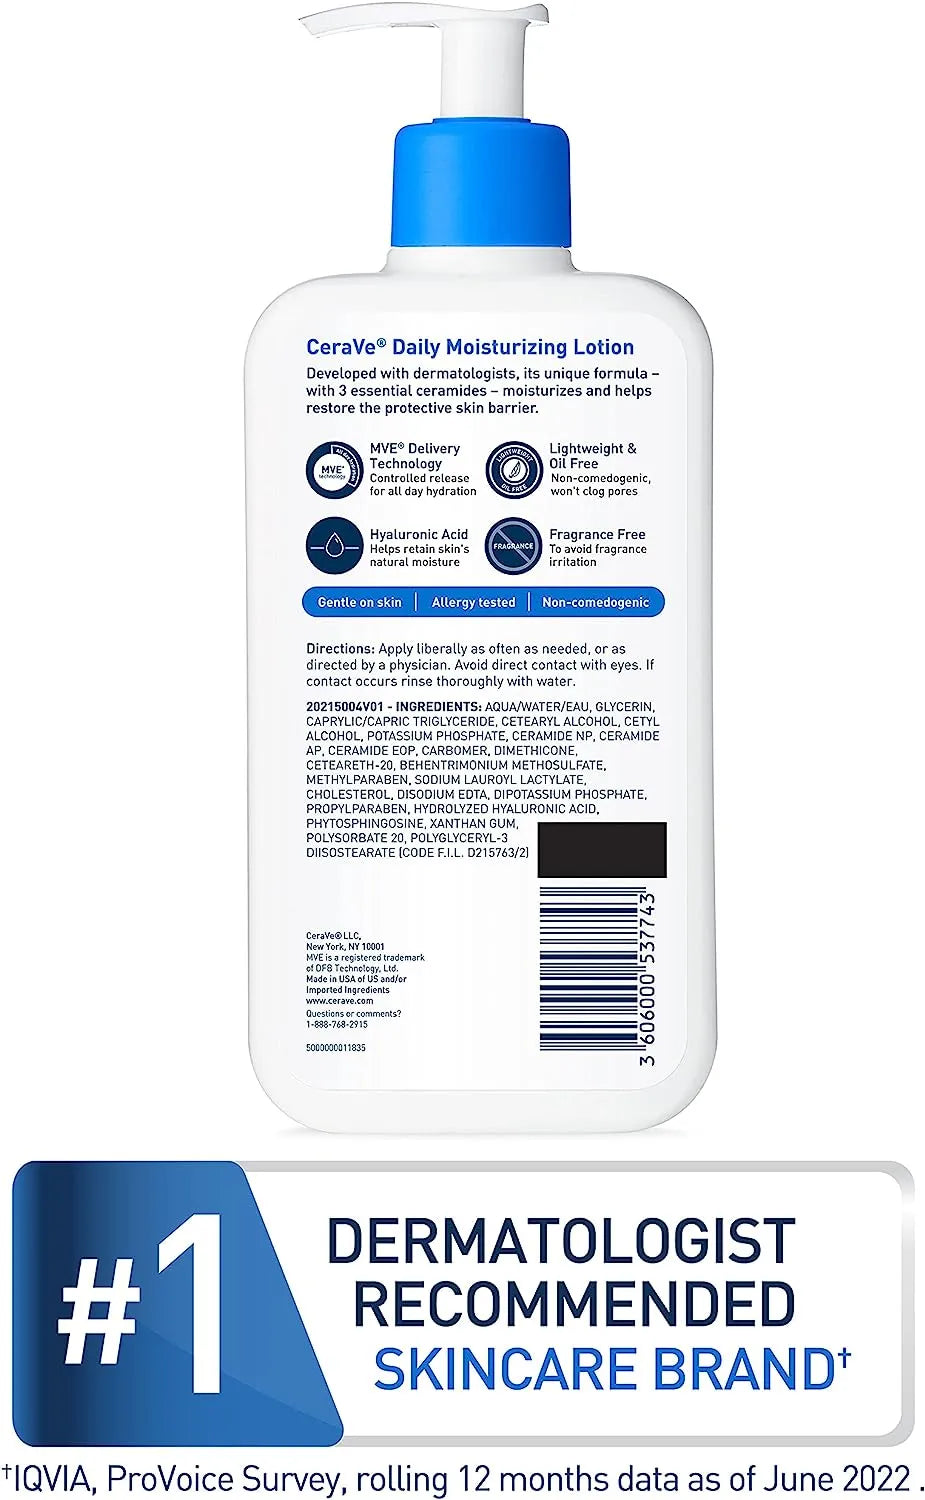  This dermatologist-developed lotion restores skin's barrier with ceramides & hyaluronic acid. CeraVe Daily Moisturizing Lotion 355ml - 3 Essential Ceramides & Hyaluronic Acid